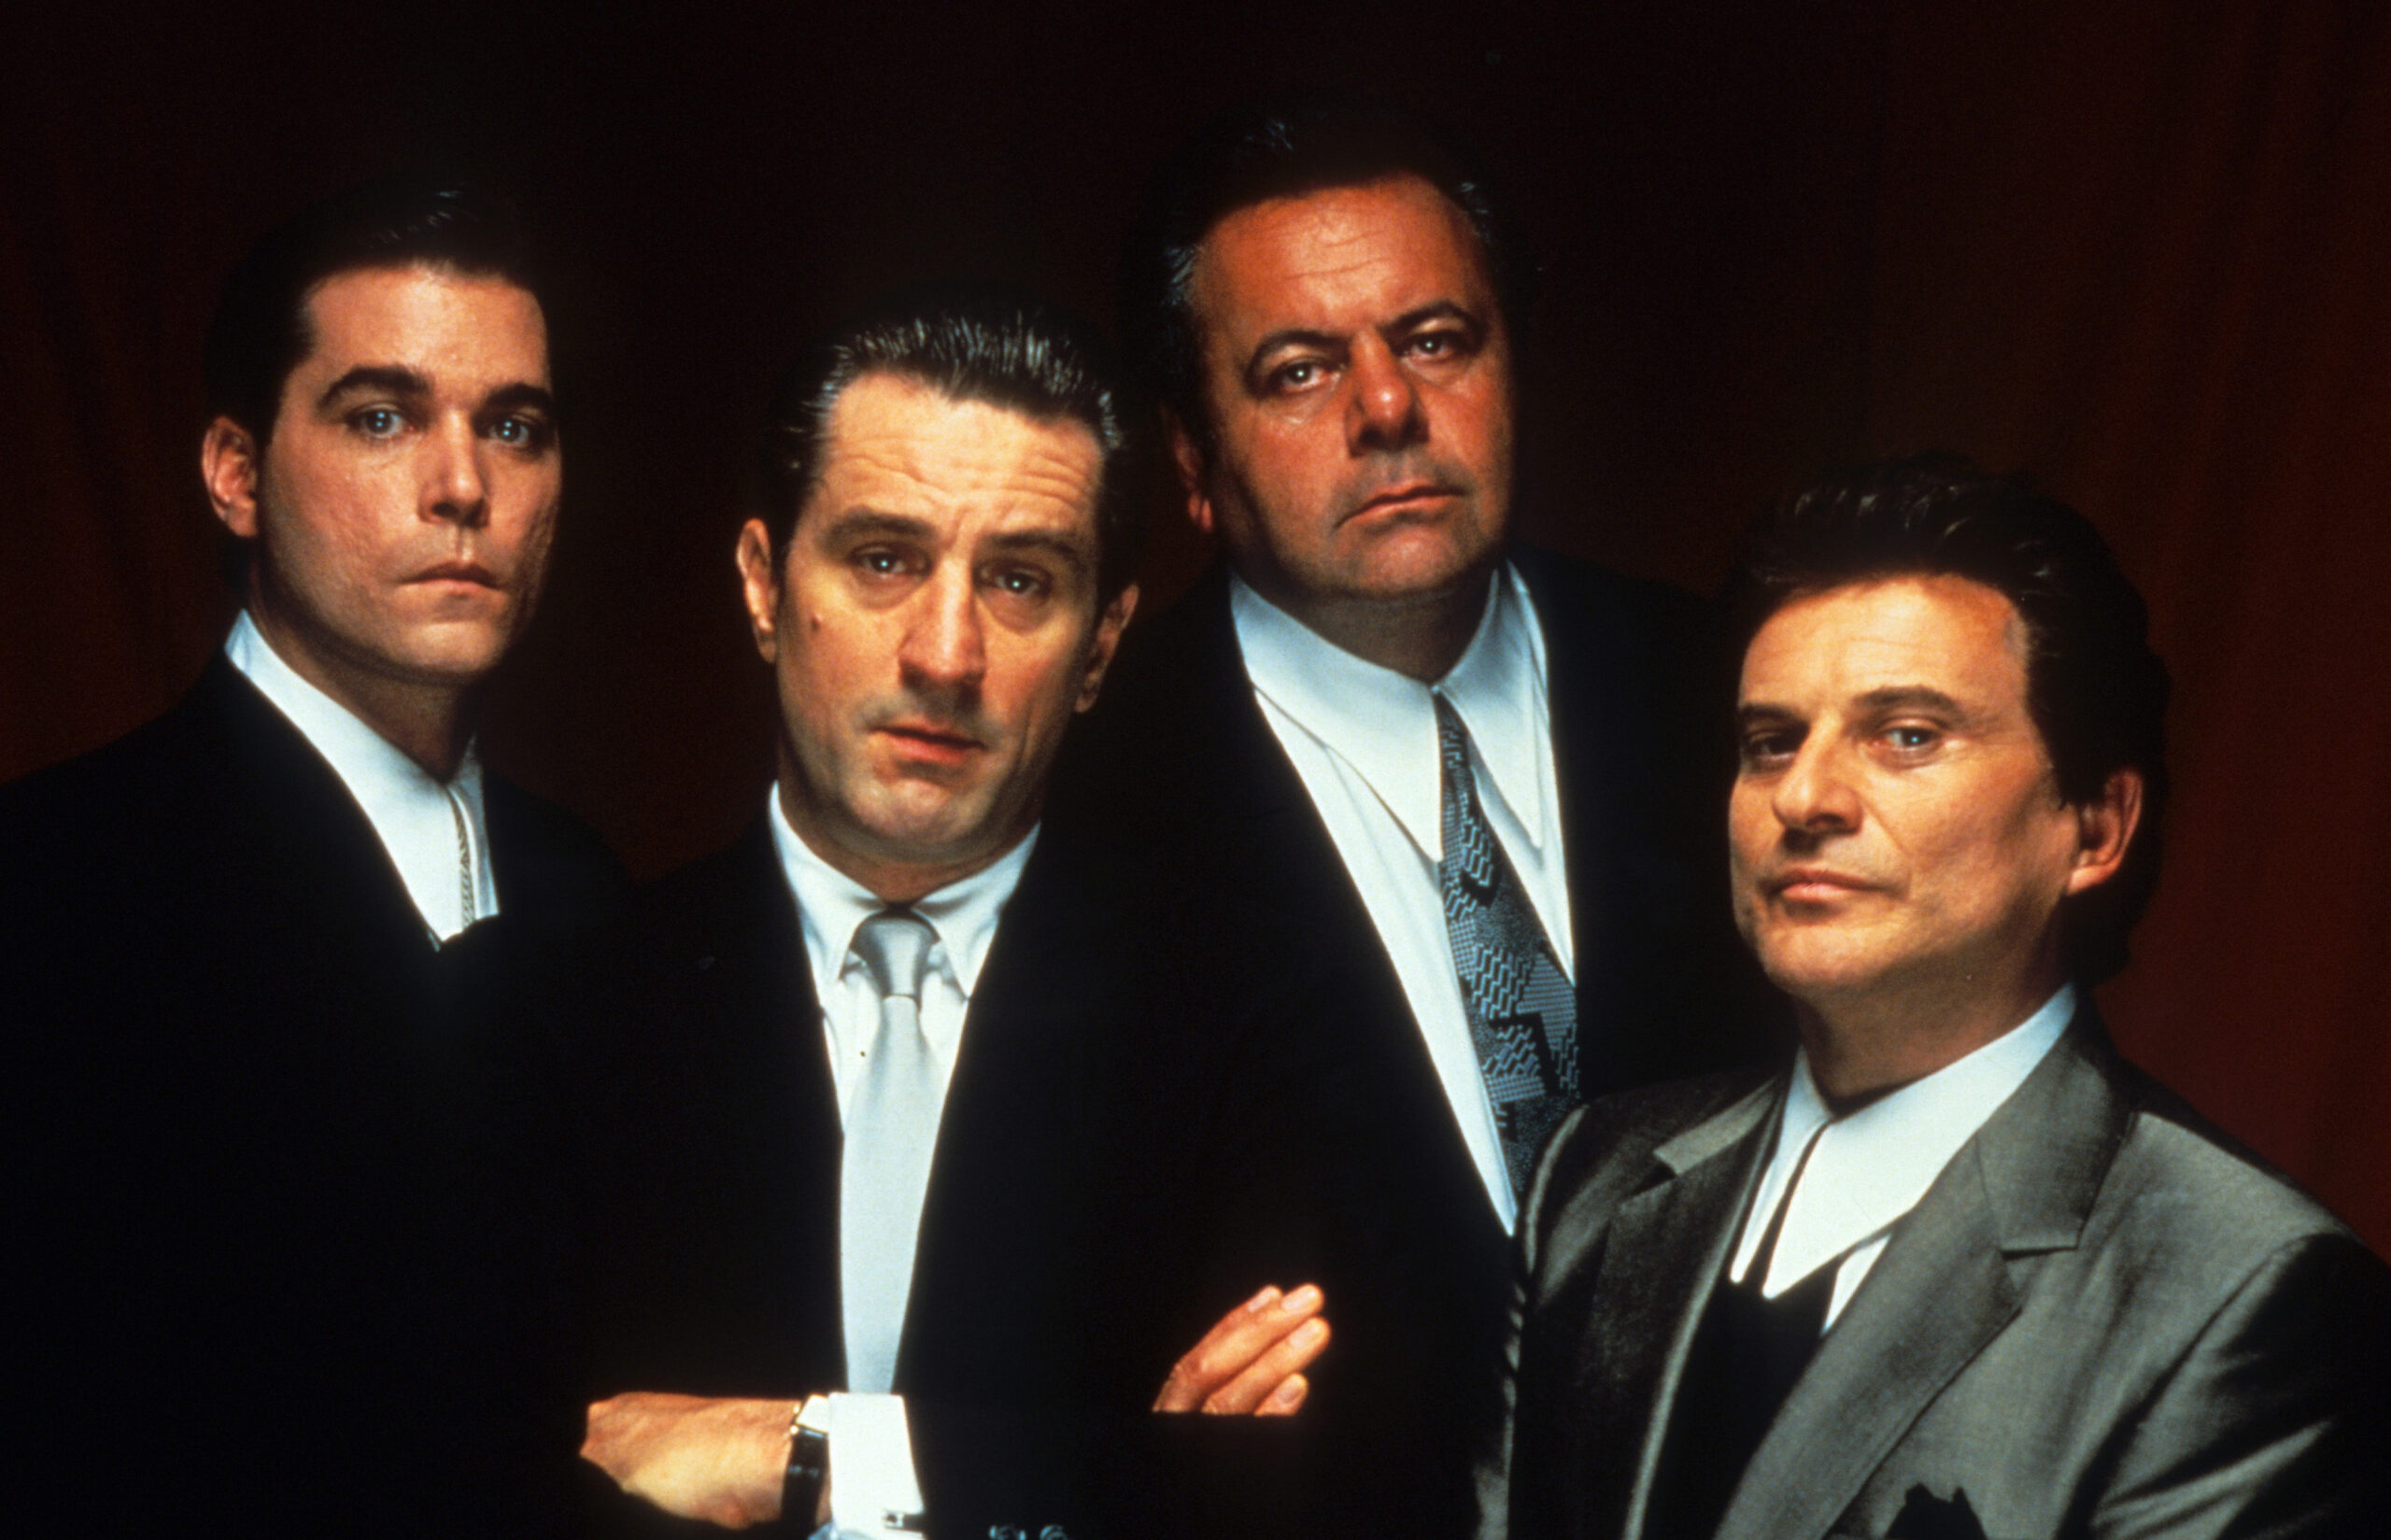 AMC criticized for labeling ‘Goodfellas’ with a ‘Cultural Stereotypes’ trigger warning